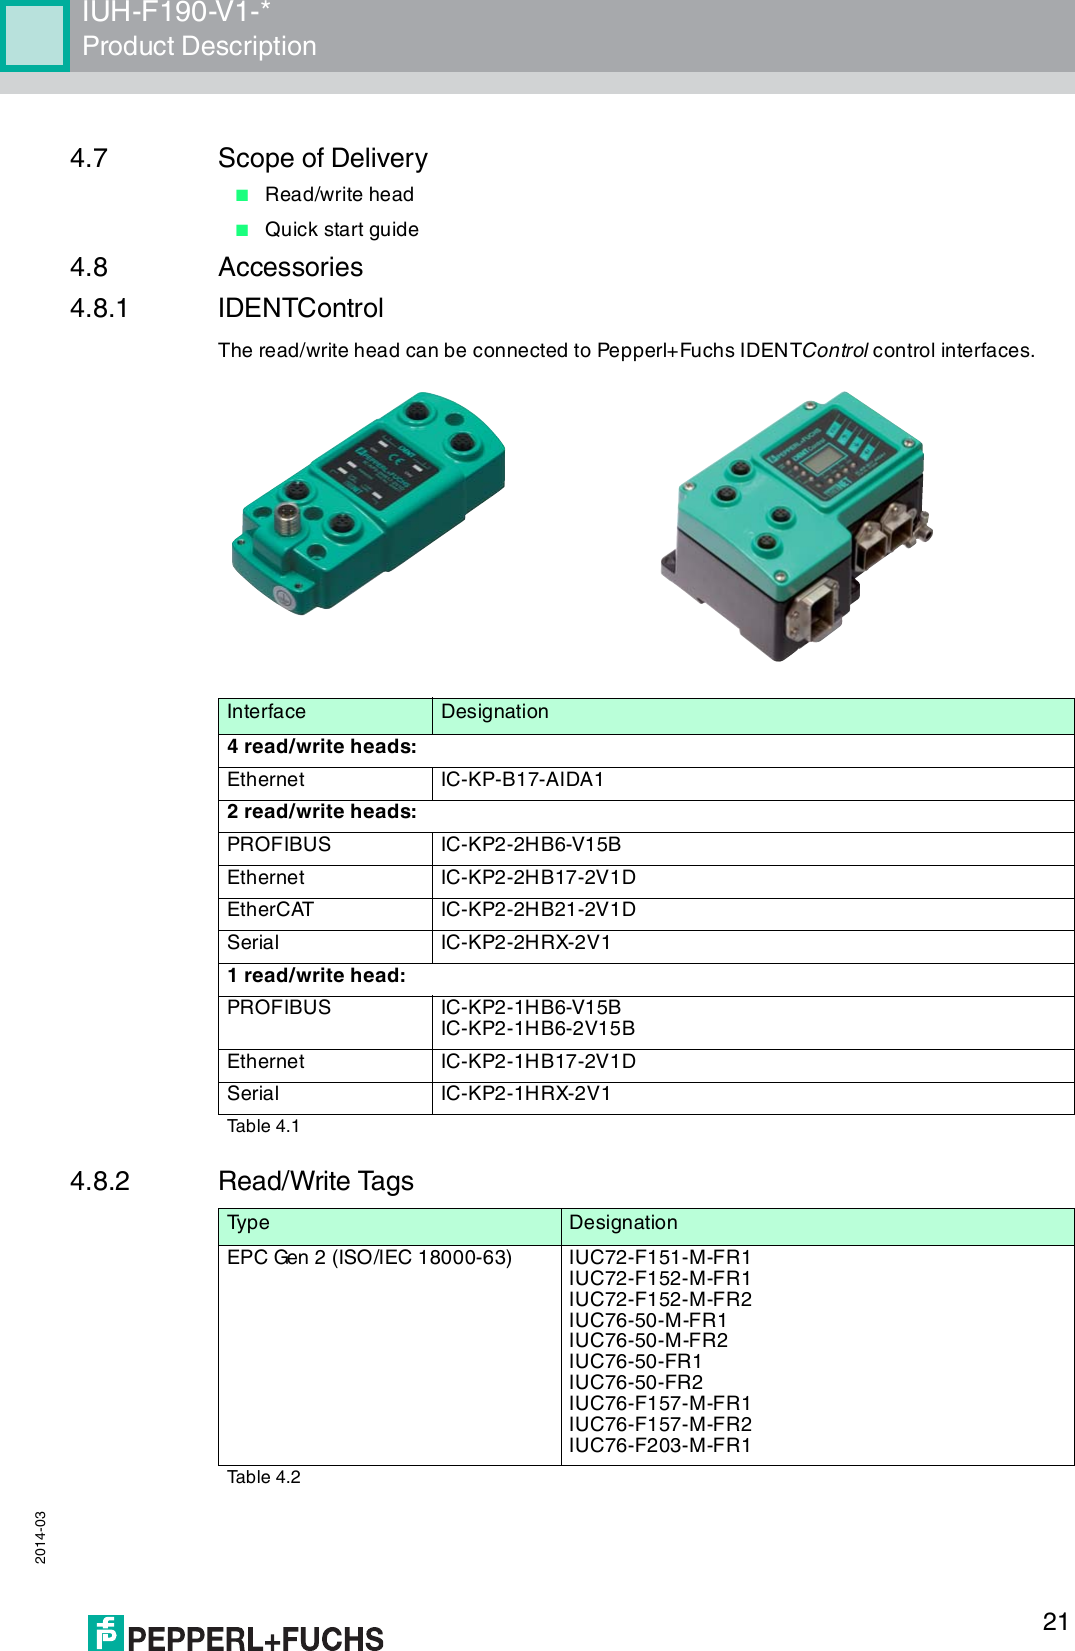 IUH-F190-V1-*Product Description 2014-03214.7 Scope of Delivery■Read/write head■Quick start guide4.8 Accessories4.8.1 IDENTControlThe read/write head can be connected to Pepperl+Fuchs IDENTControl control interfaces.4.8.2 Read/Write TagsInterface Designation4 read/write heads:Ethernet IC-KP-B17-AIDA12 read/write heads:PROFIBUS IC-KP2-2HB6-V15BEthernet IC-KP2-2HB17-2V1DEtherCAT IC-KP2-2HB21-2V1DSerial IC-KP2-2HRX-2V11 read/write head:PROFIBUS IC-KP2-1HB6-V15BIC-KP2-1HB6-2V15BEthernet IC-KP2-1HB17-2V1DSerial IC-KP2-1HRX-2V1Tab le 4.1Typ e DesignationEPC Gen 2 (ISO/IEC 18000-63) IUC72-F151-M-FR1IUC72-F152-M-FR1IUC72-F152-M-FR2IUC76-50-M-FR1IUC76-50-M-FR2IUC76-50-FR1IUC76-50-FR2IUC76-F157-M-FR1IUC76-F157-M-FR2IUC76-F203-M-FR1Tab le 4.2